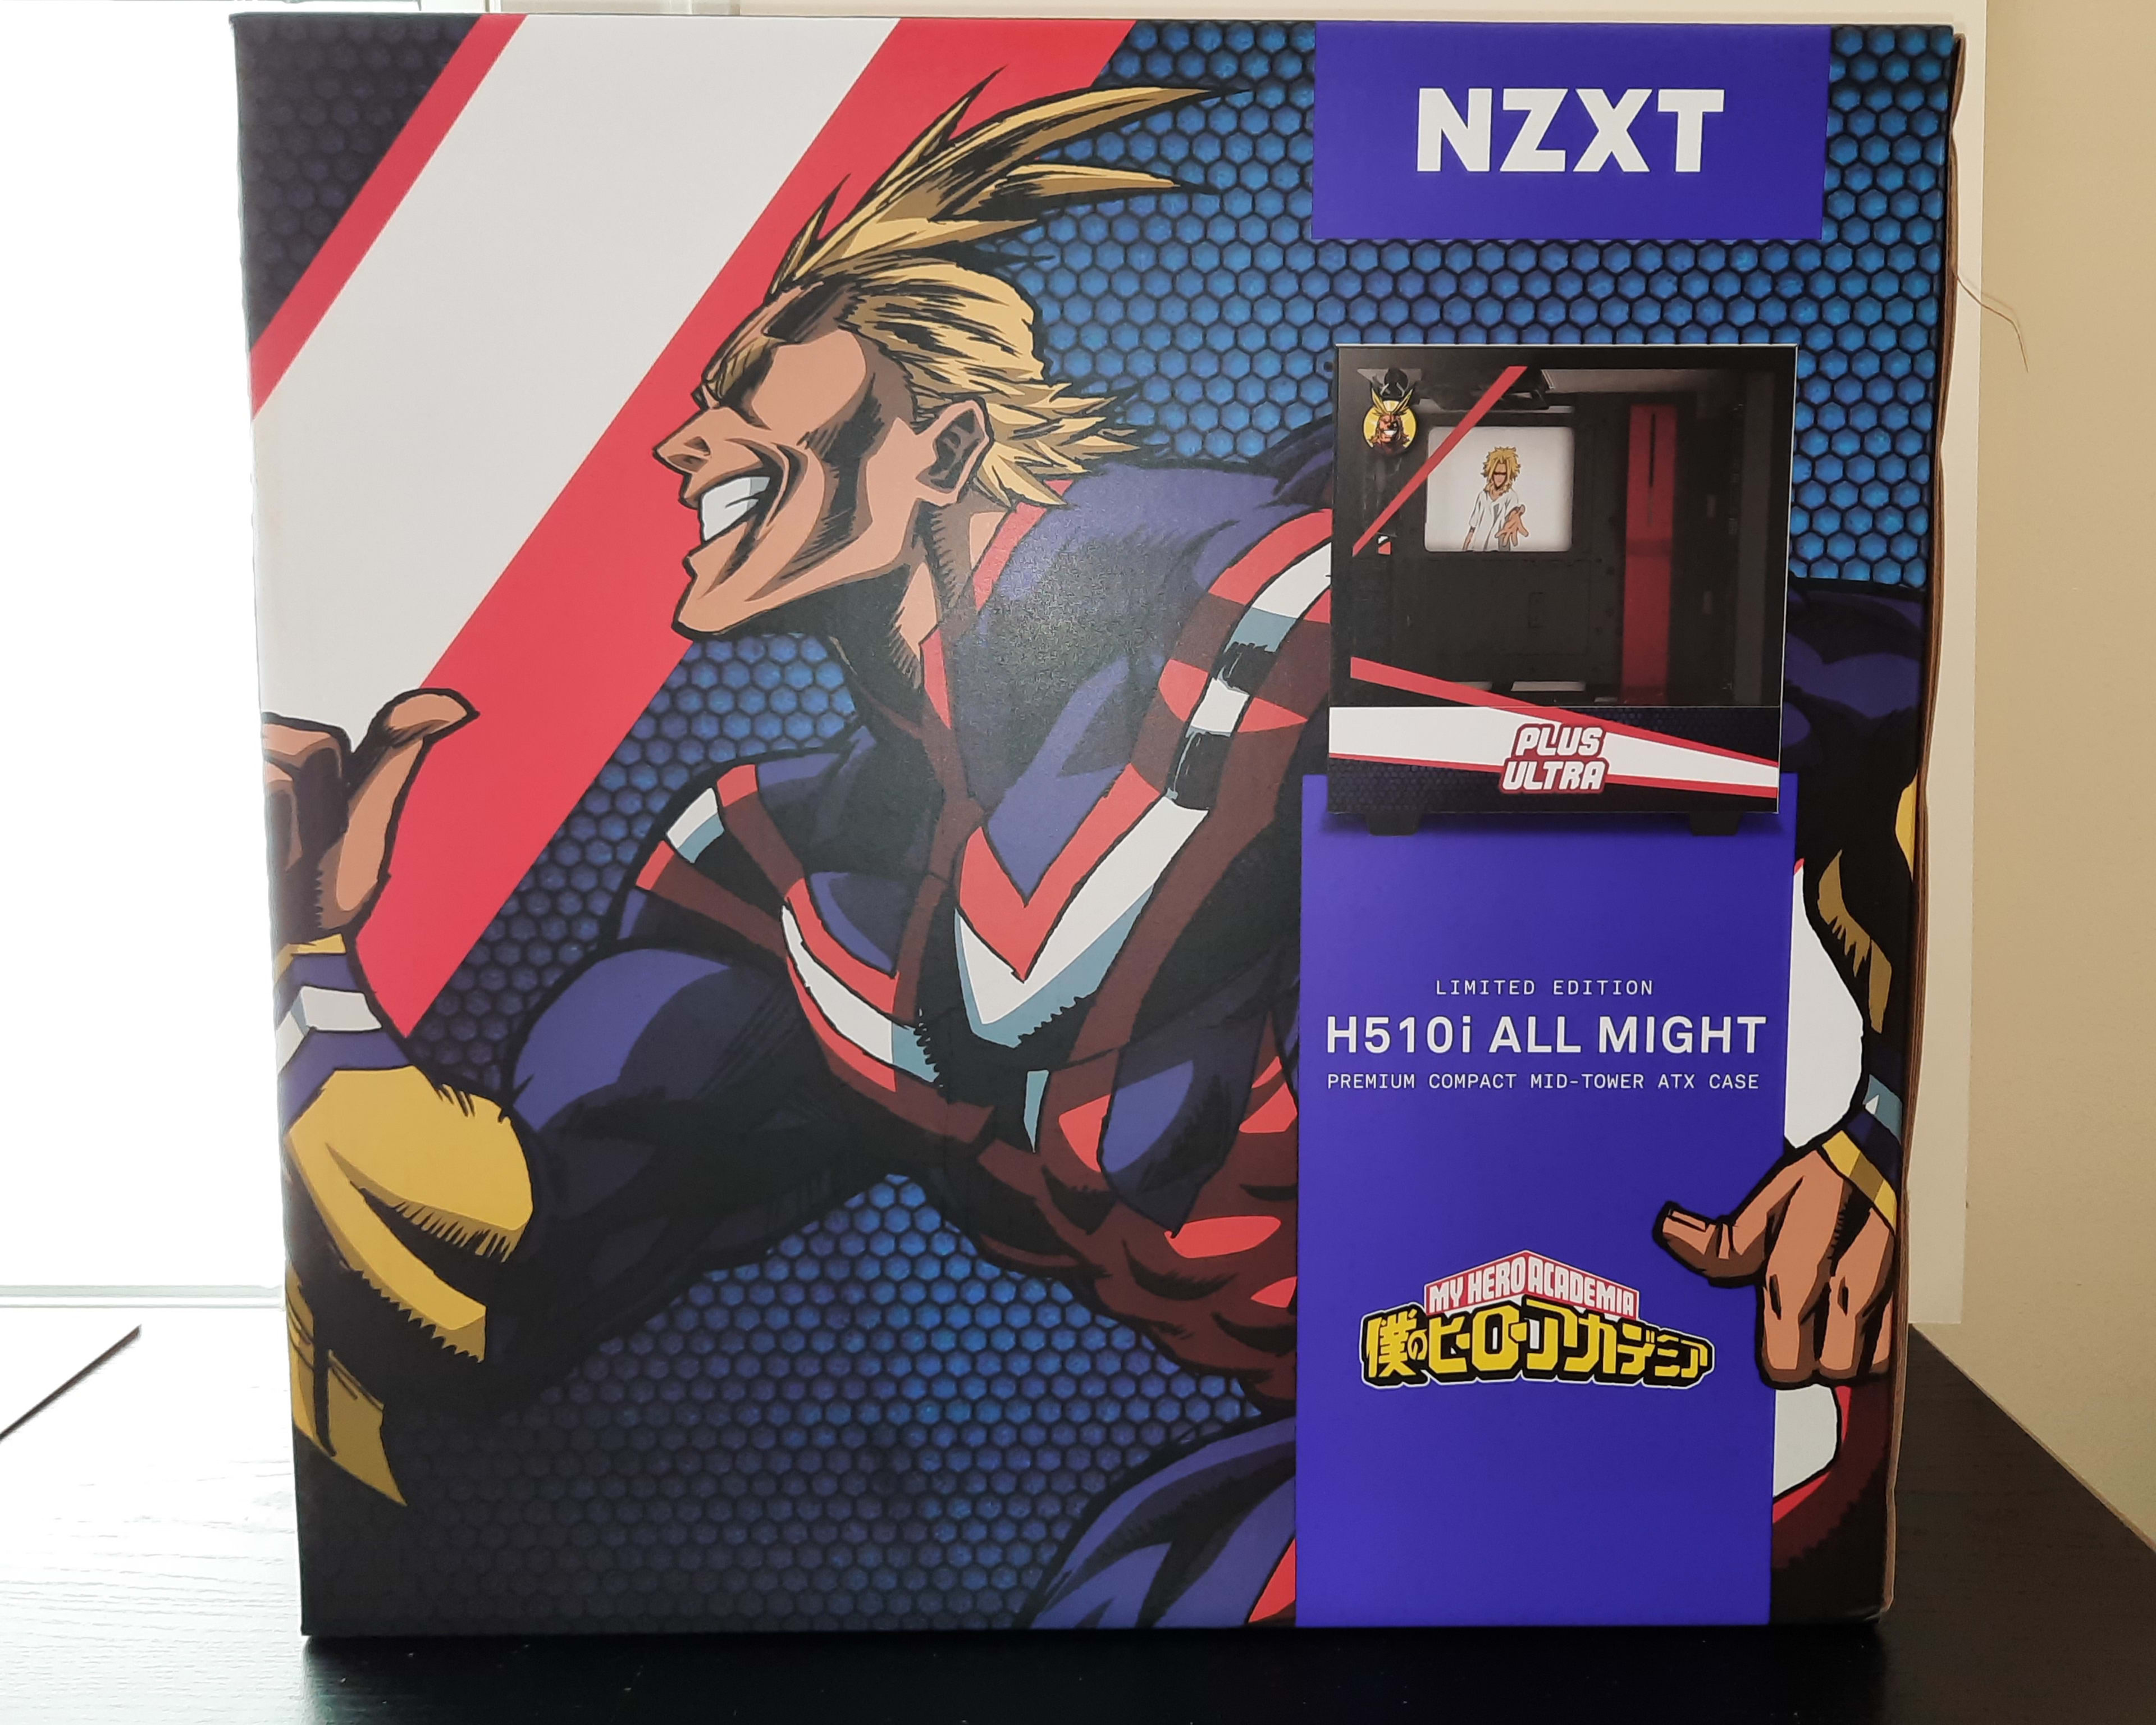 NZXT H510i All Might - My Hero Academia Manga - Limited Edition Mid-Tower PC Desktop Case